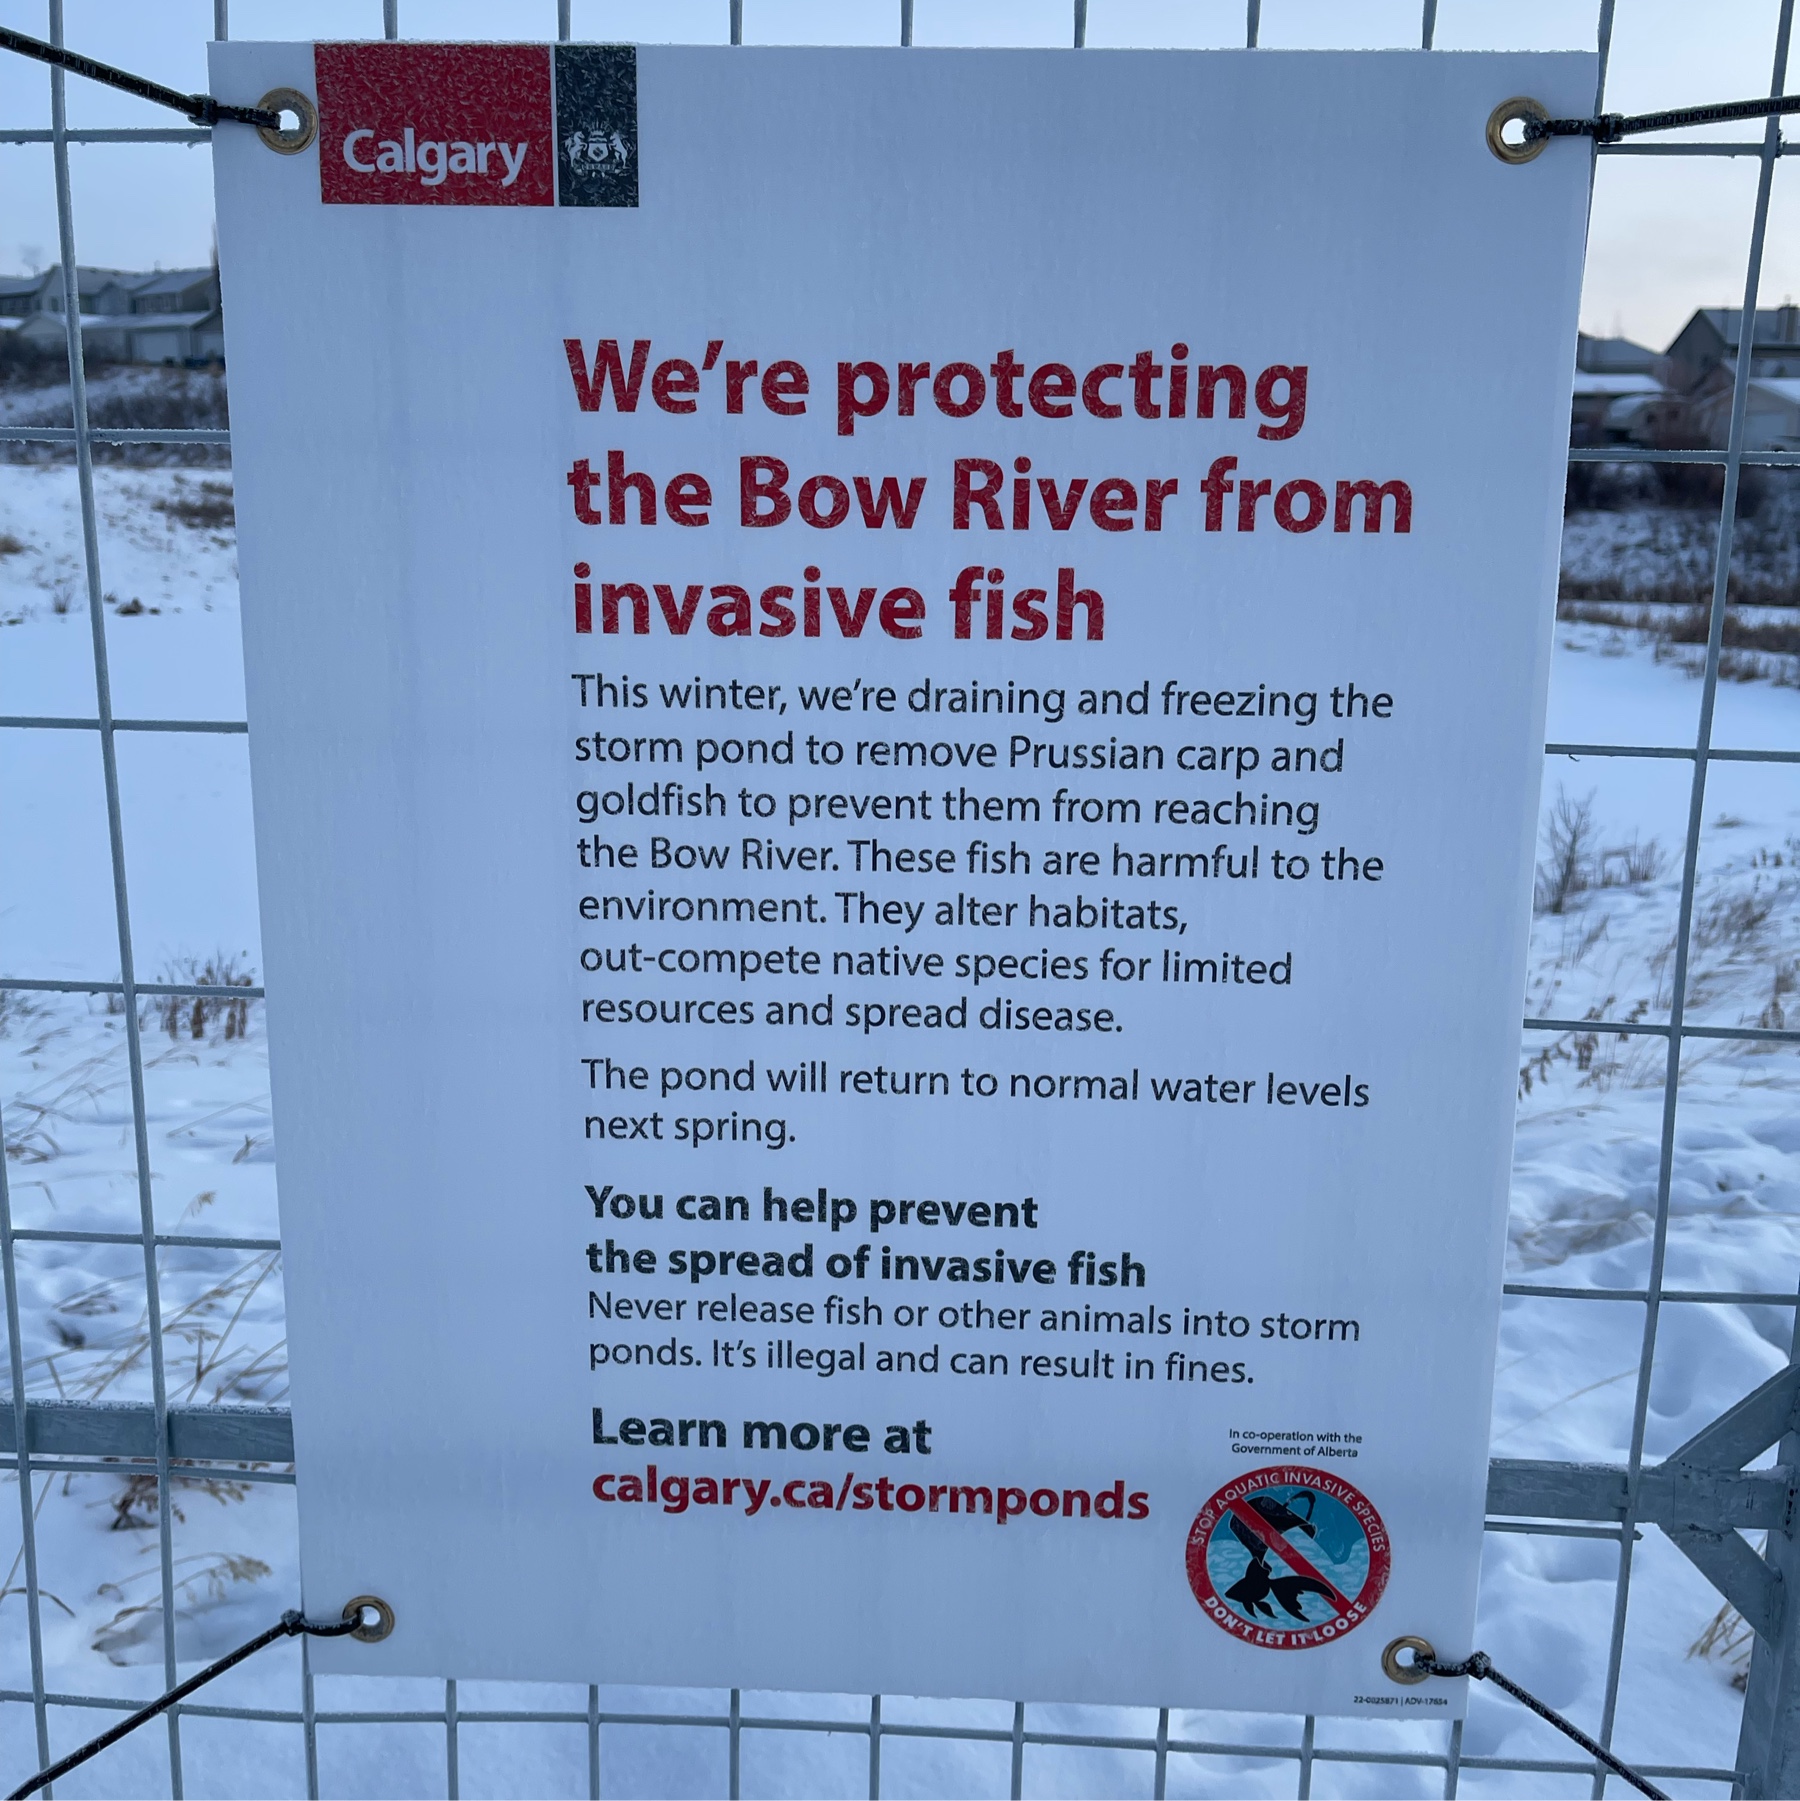 We're protecting the Bow River from invasive fish This winter, we're draining and freezing the storm pond to remove Prussian carp and goldfish to prevent them from reaching the Bow River. These fish are harmful to the environment. They alter habitats, outcompete native species for limited resources and spread disease. The pond will return to normal water levels next spring. You can help prevent the spread of invasive fish Never release fish or other animals into storm ponds. It's illegal and can result in fines. Learn more at lith the calgary.ca/stormponds